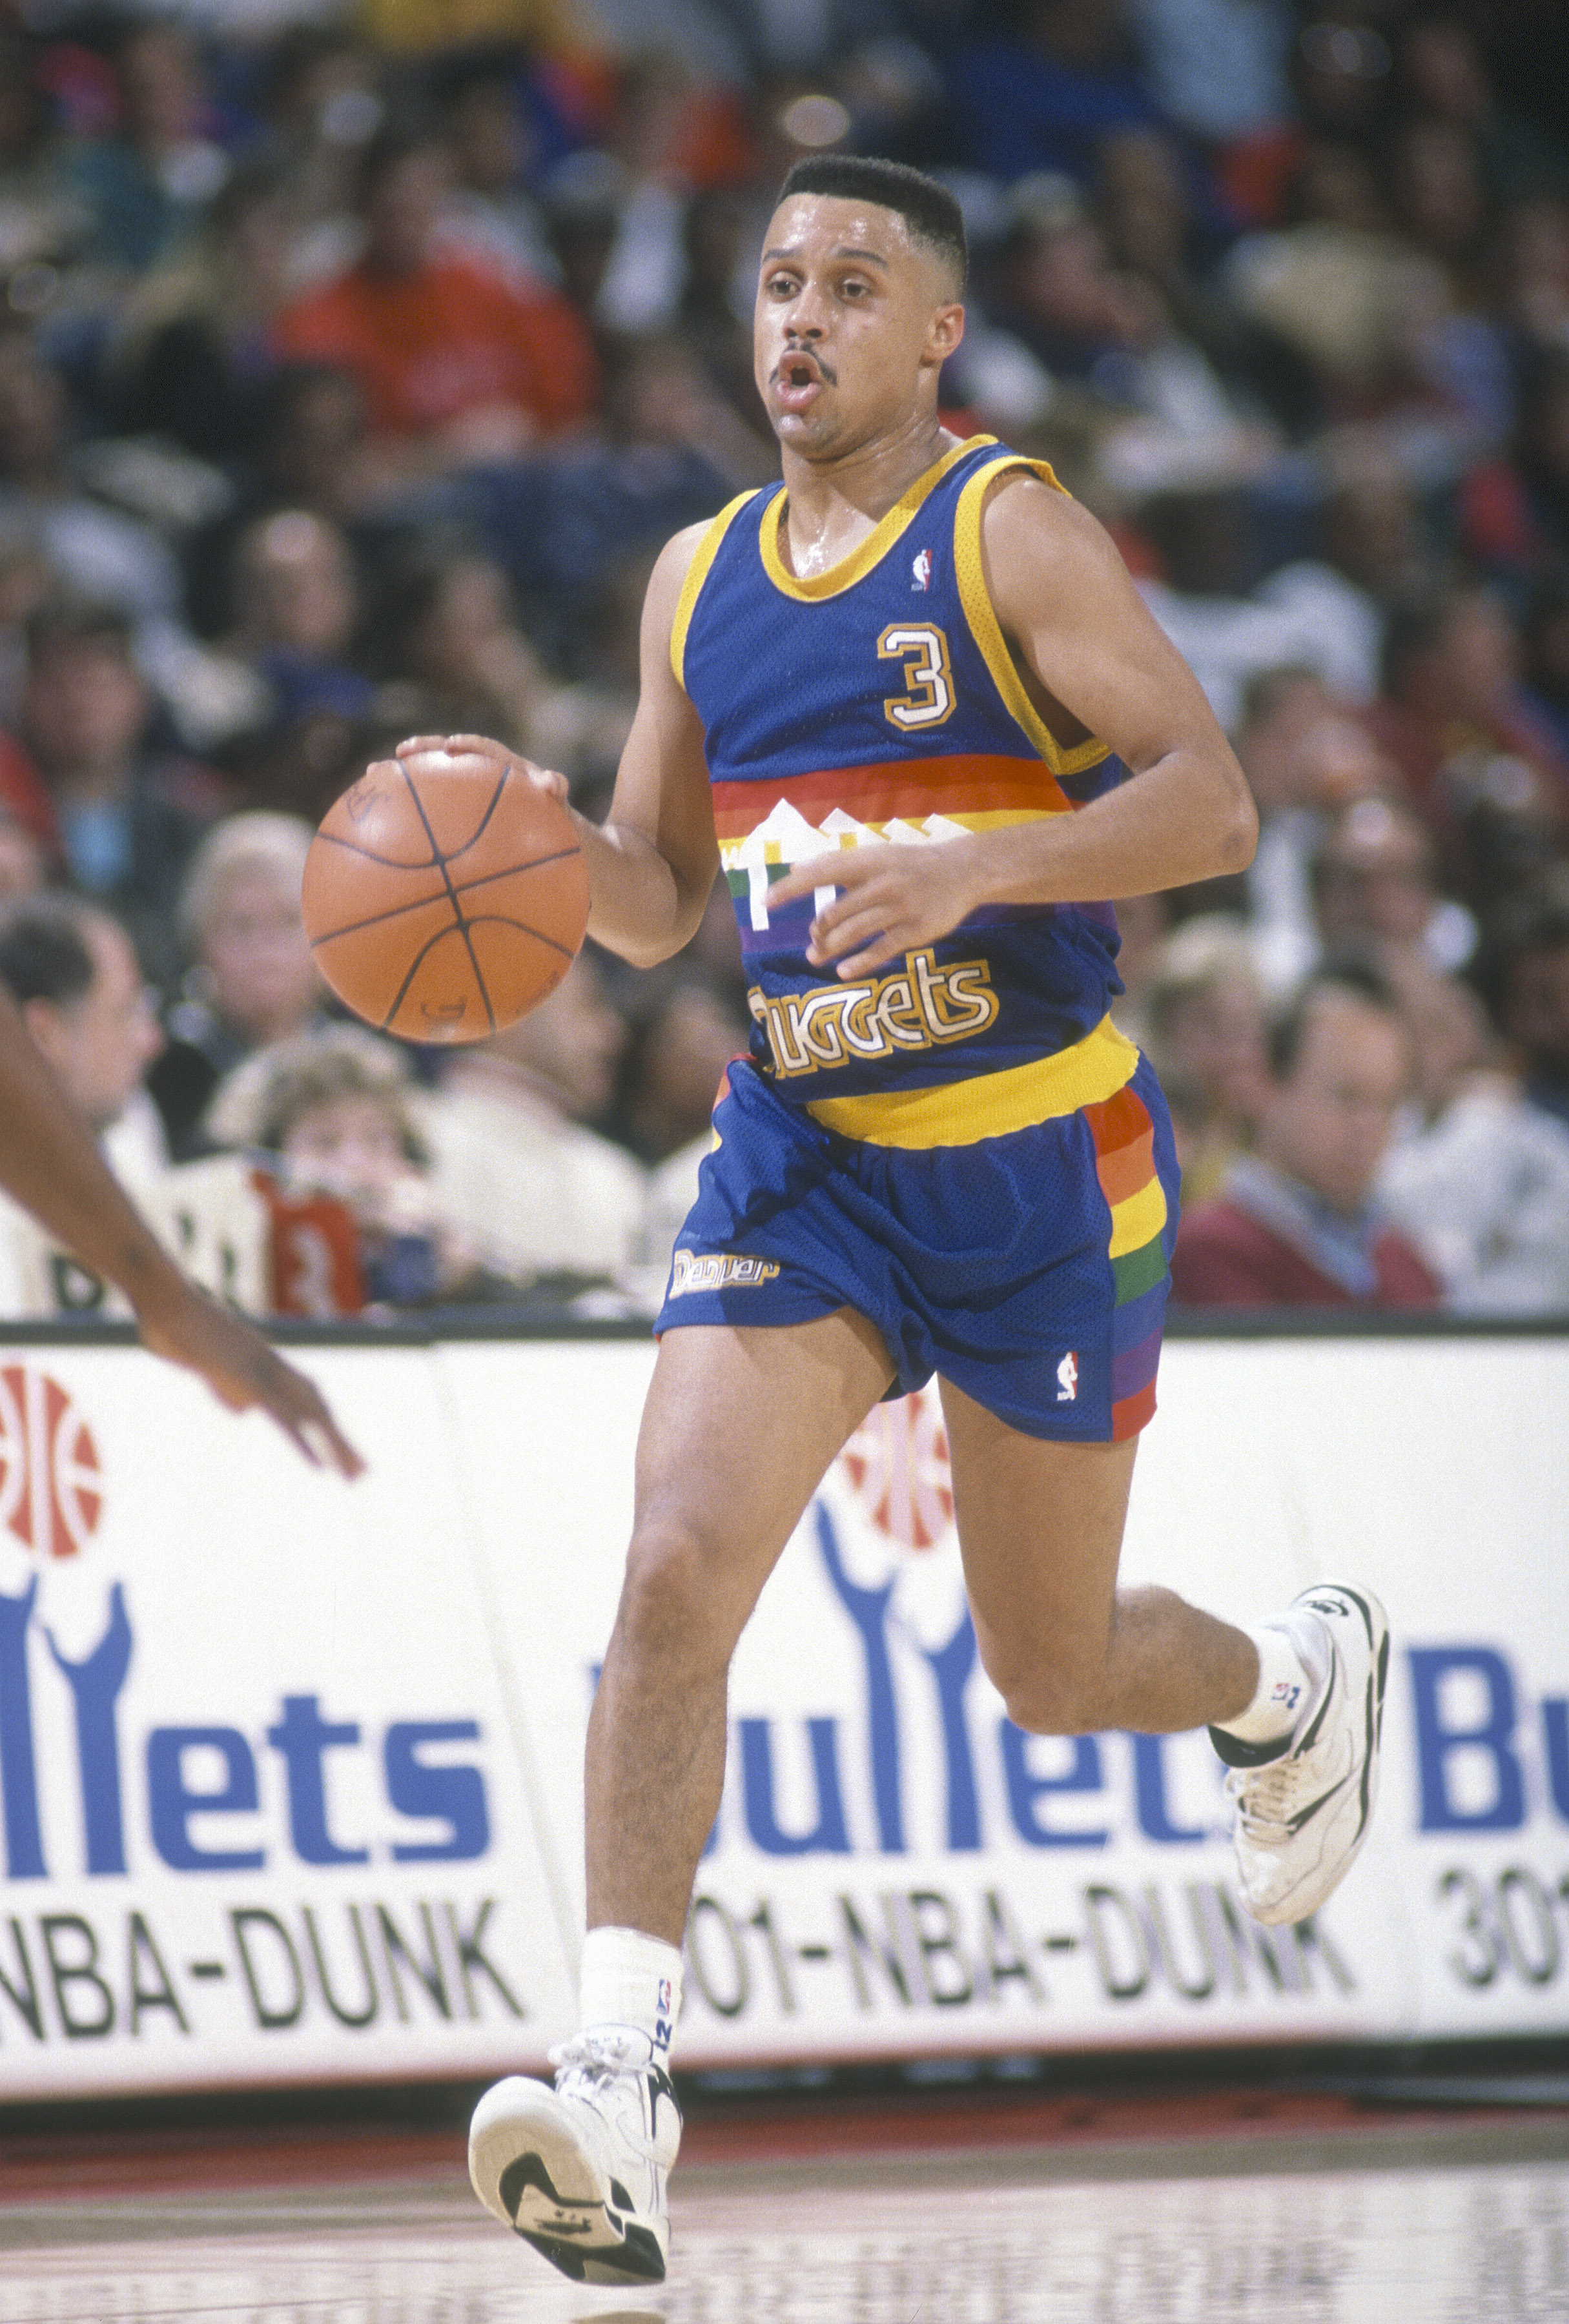 Mahmoud Abdul-Rauf  #3 of the Denver Nuggets dribbles the ball up court against the Washington Bullets during an NBA basketball game circa 1991 at the Capital Centre in Landover, Maryland. Abdul-Rauf played for the Nuggets from 1990-96. (Photo by Focus on Sport—Getty Images)